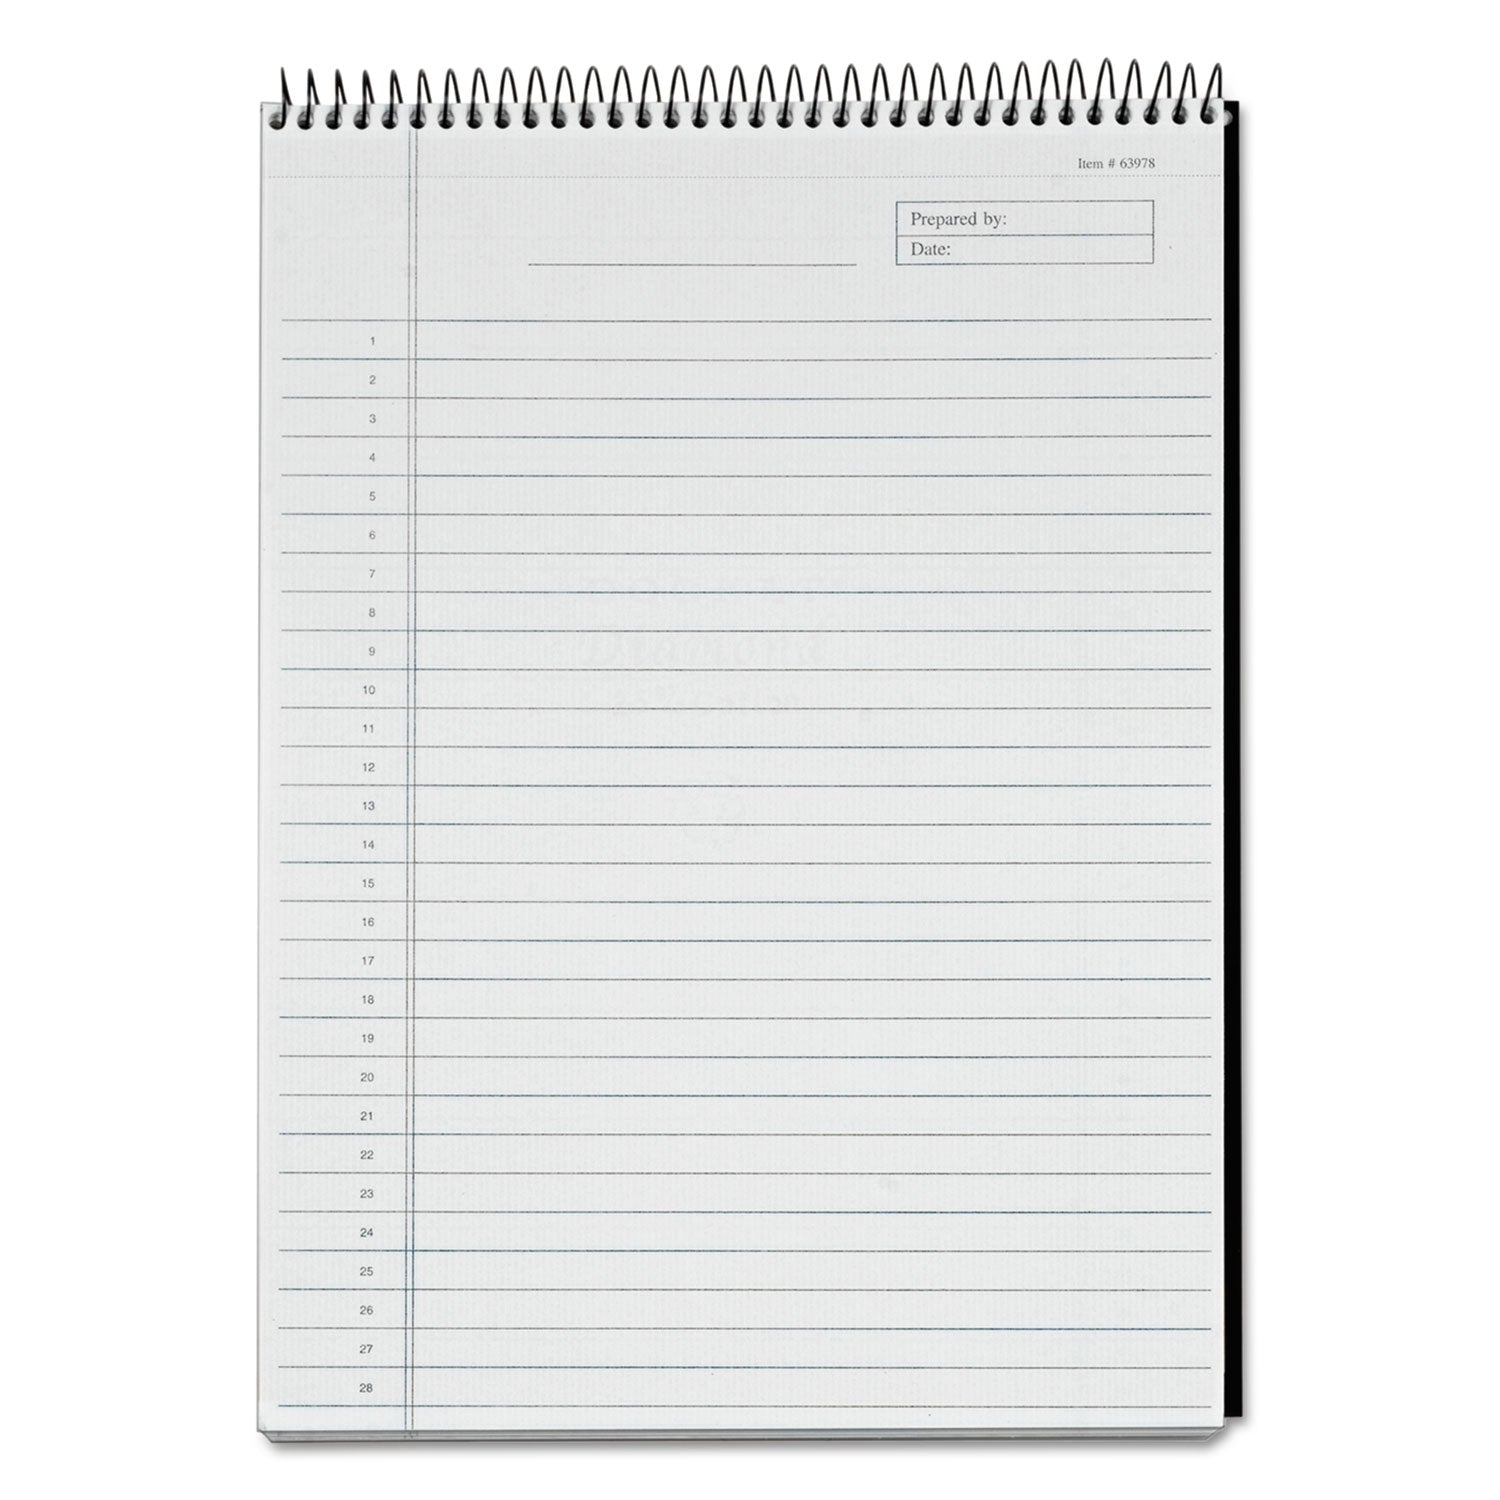 Docket Diamond Top-Wire Ruled Planning Pad, Wide/Legal Rule, Black Cover, 60 White 8.5 x 11.75 Sheets - 